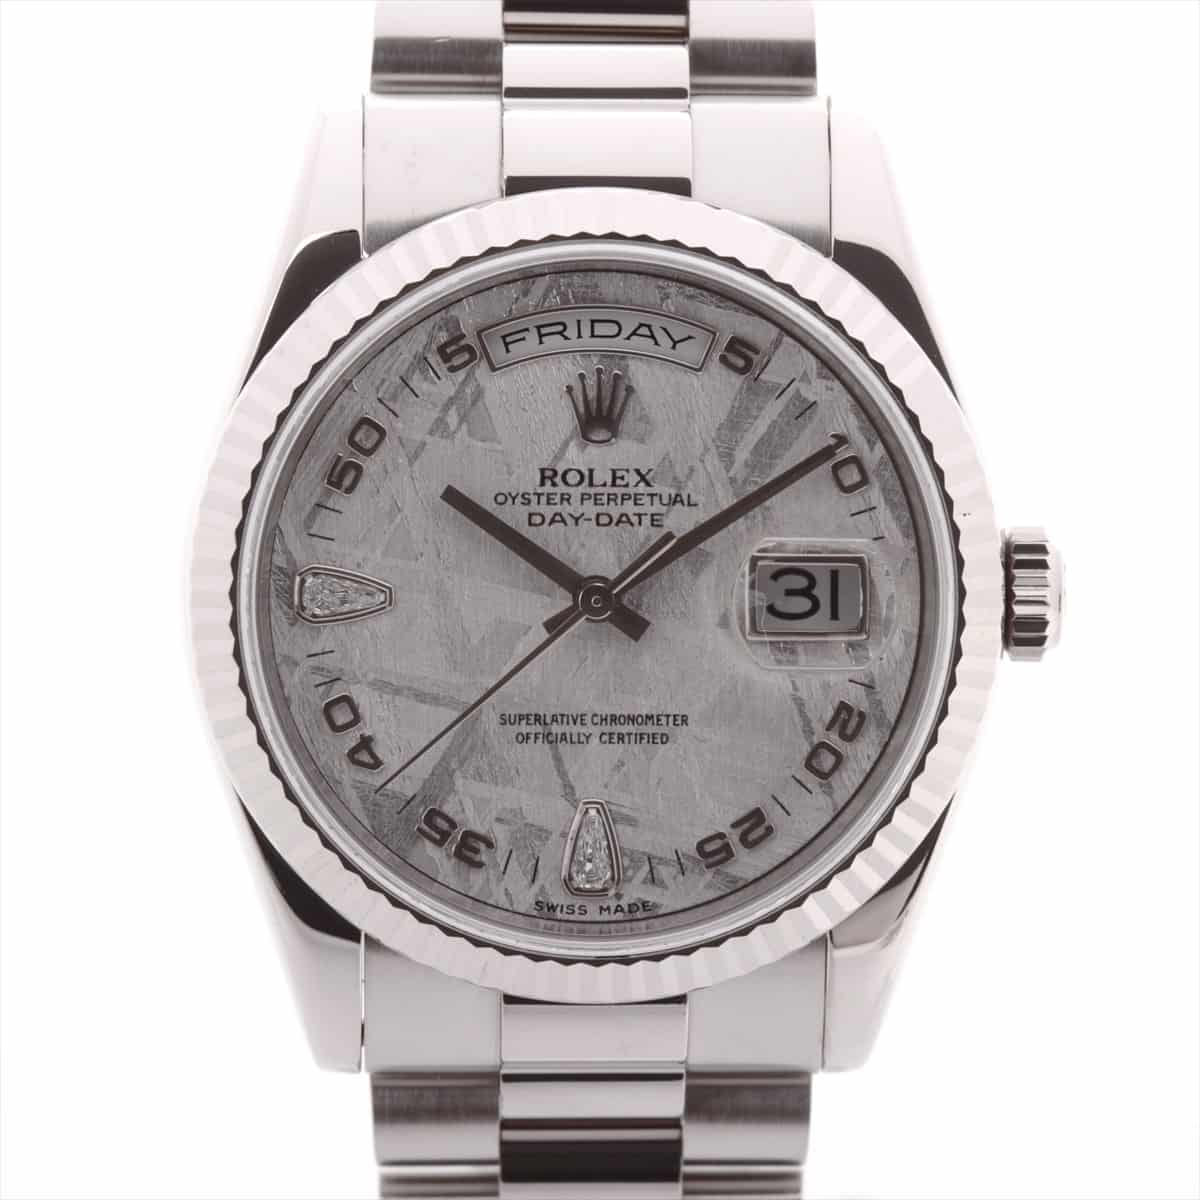 Rolex Day Date 118239 F number 2BR 750 AT Meteorite dial